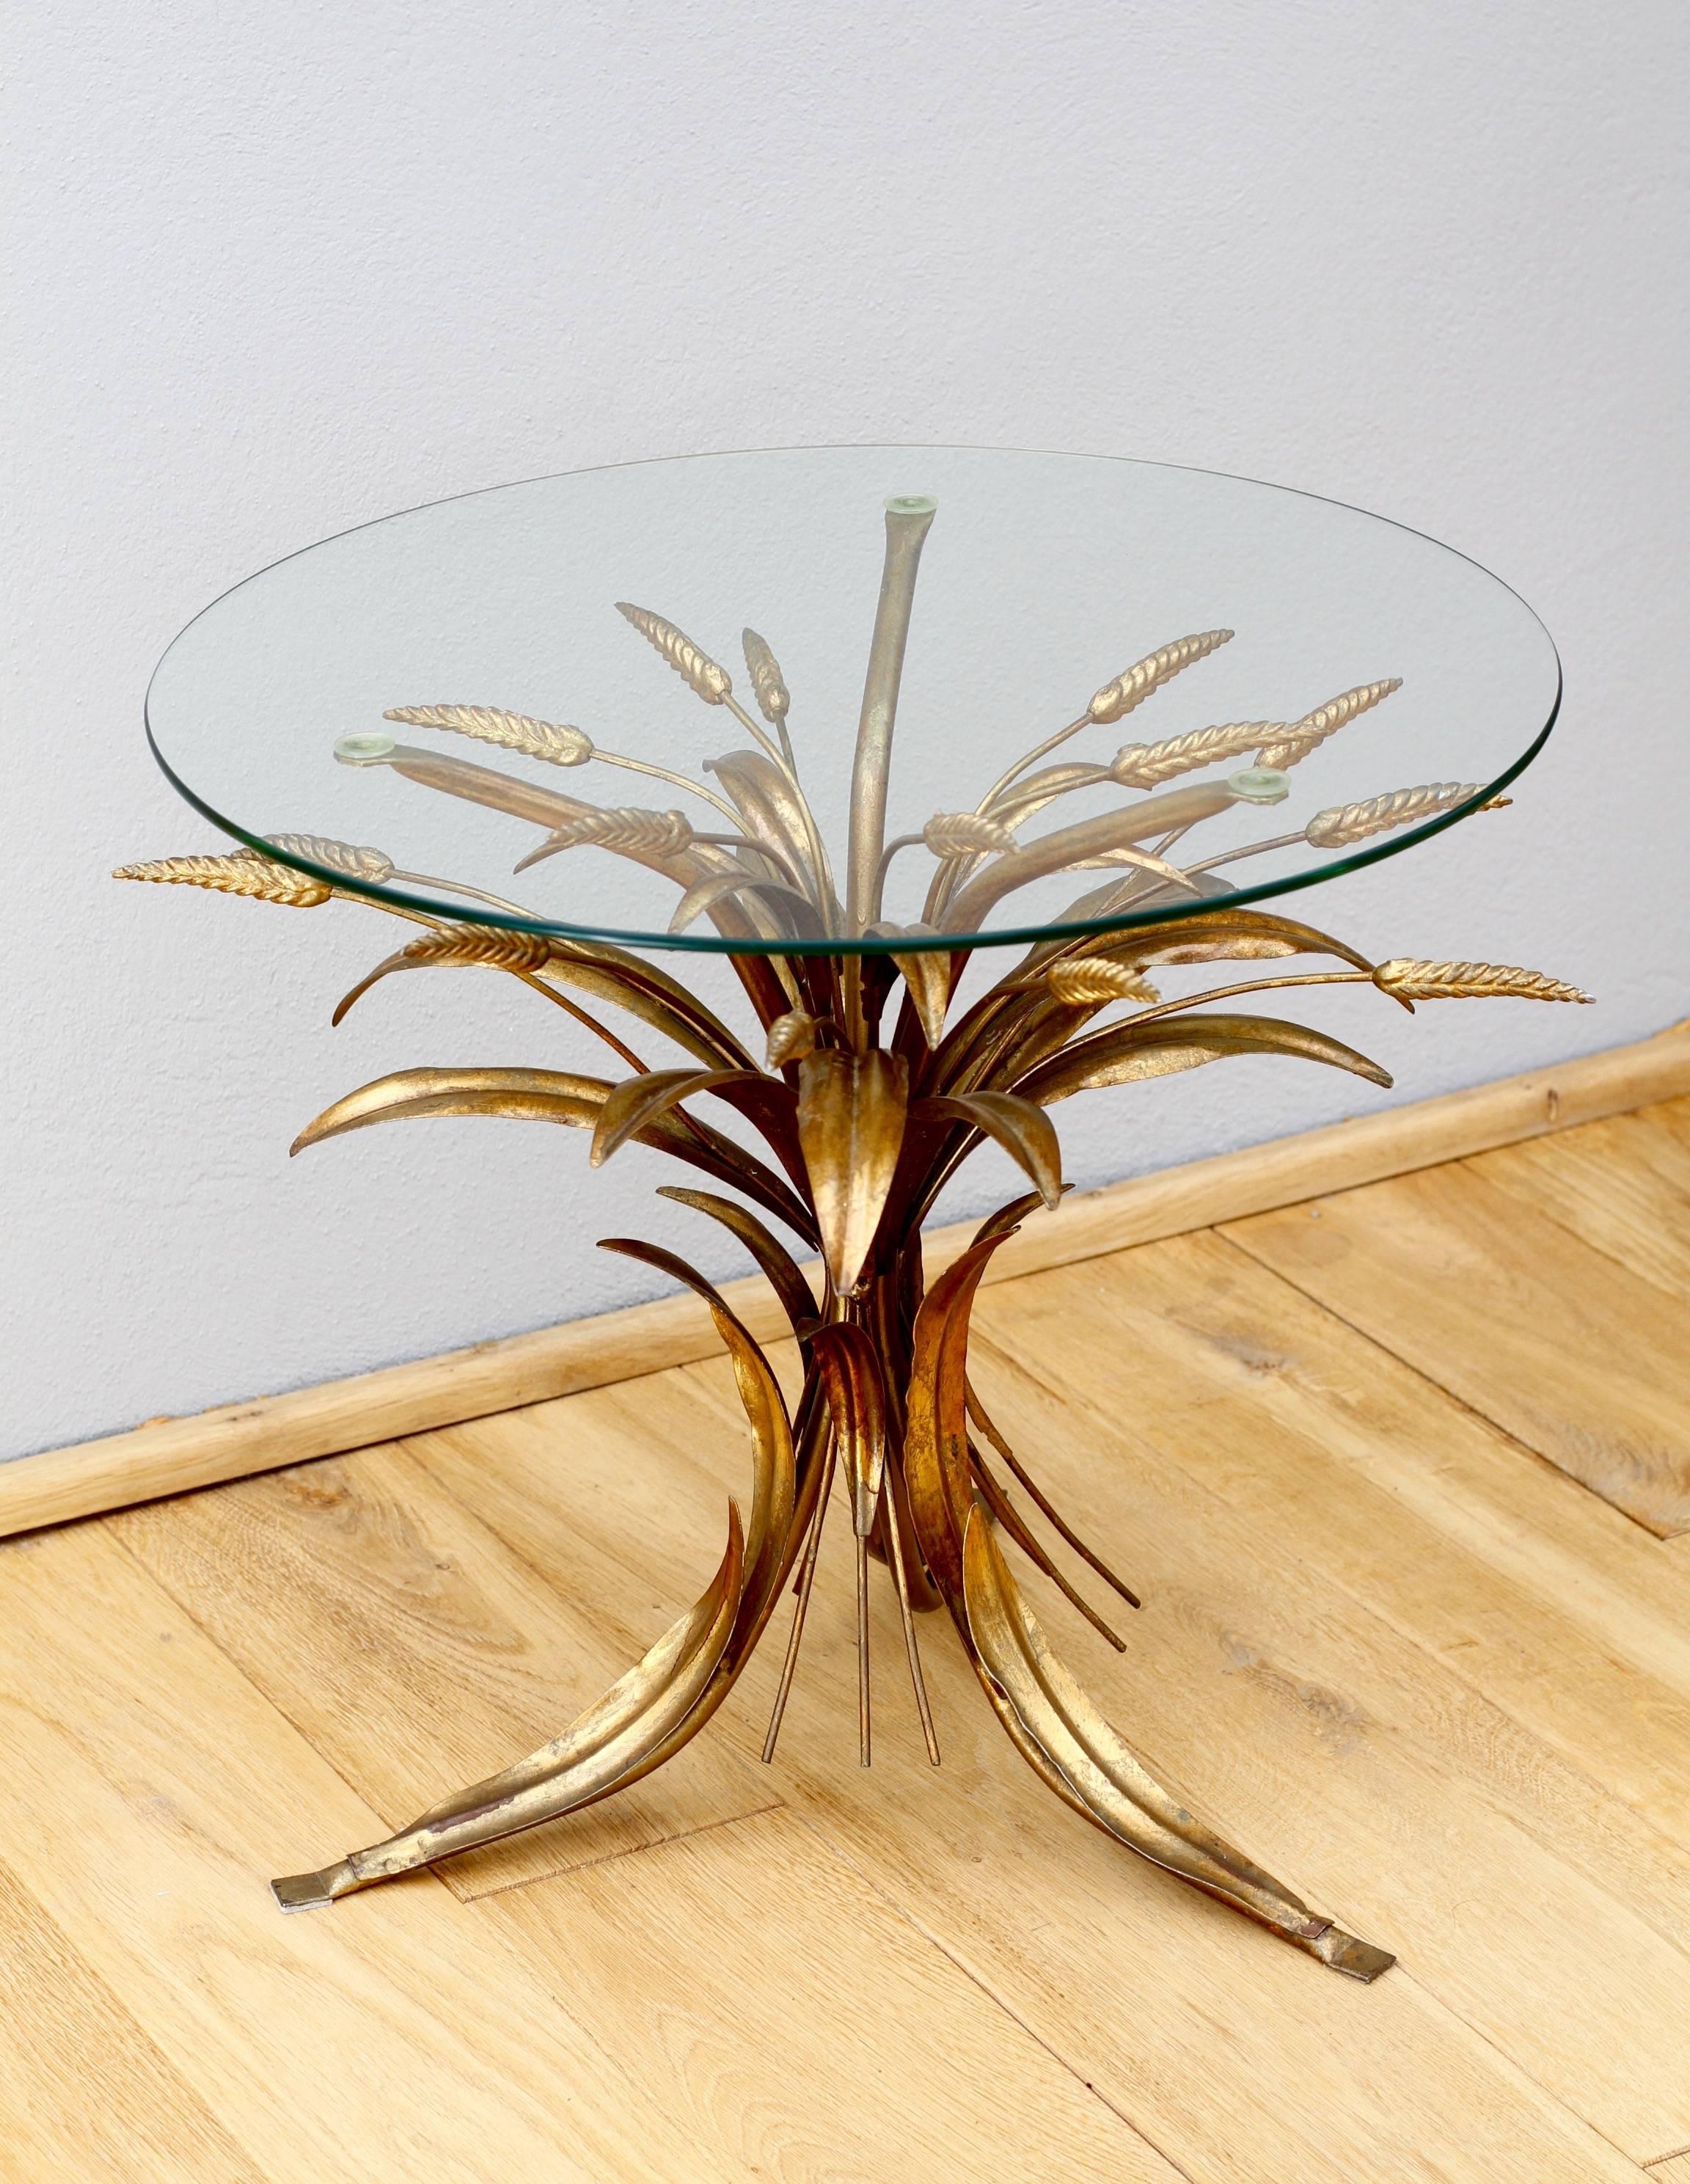 A stunningly Italian made side or end table by German manufacturer Hans Kögl (Koegl/Kogl), circa 1970s. Hans Kögl was famous for his light and table designs incorporating natural organic forms such as palm tree leaves and sheafs of bound wheat. His